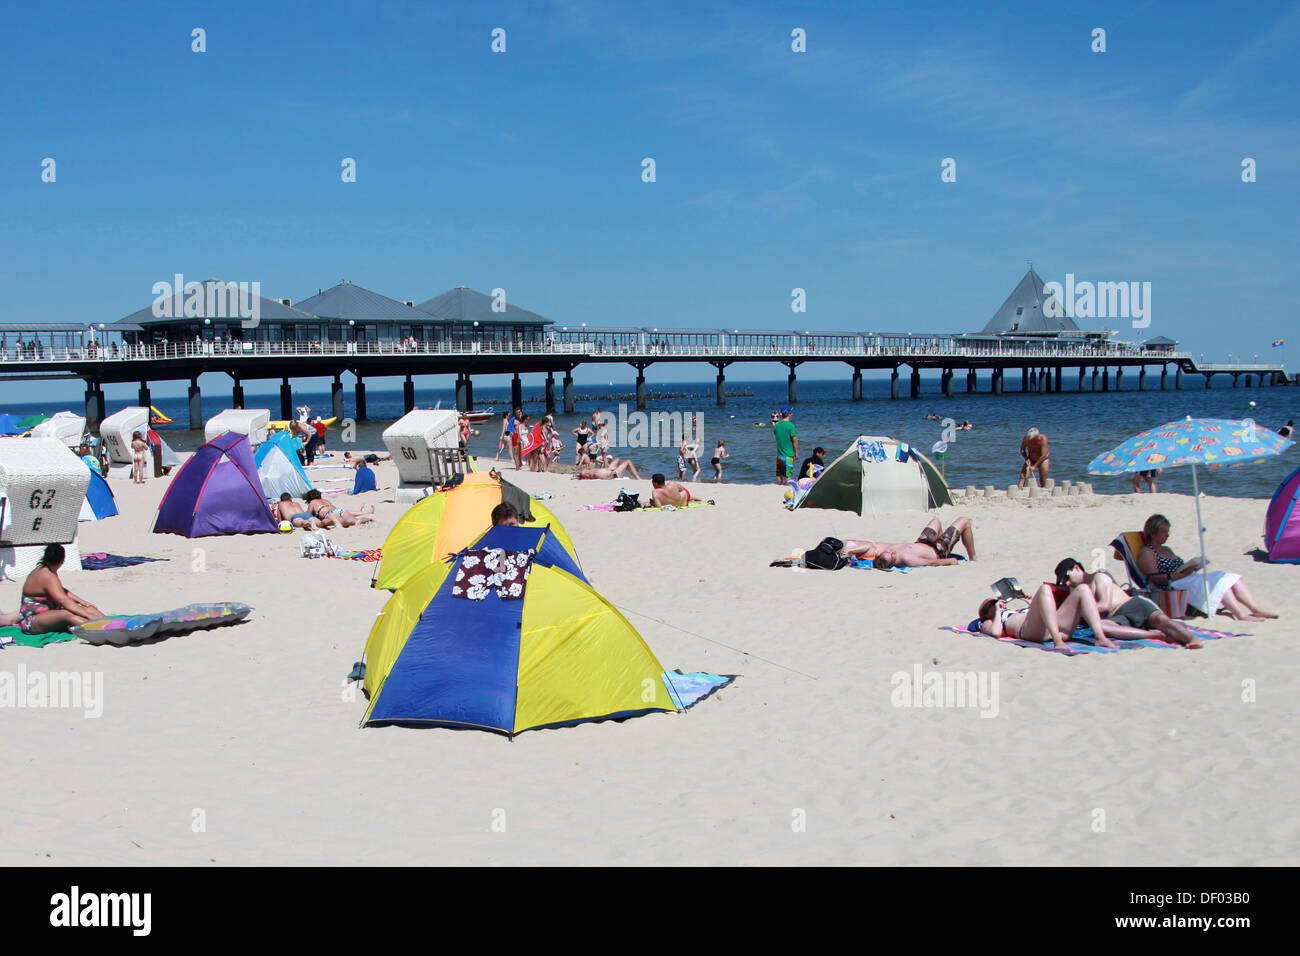 Tourists with beach tents on the beach in front of the pier, Heringsdorf, Mecklenburg-Western Pomerania, Germany Stock Photo